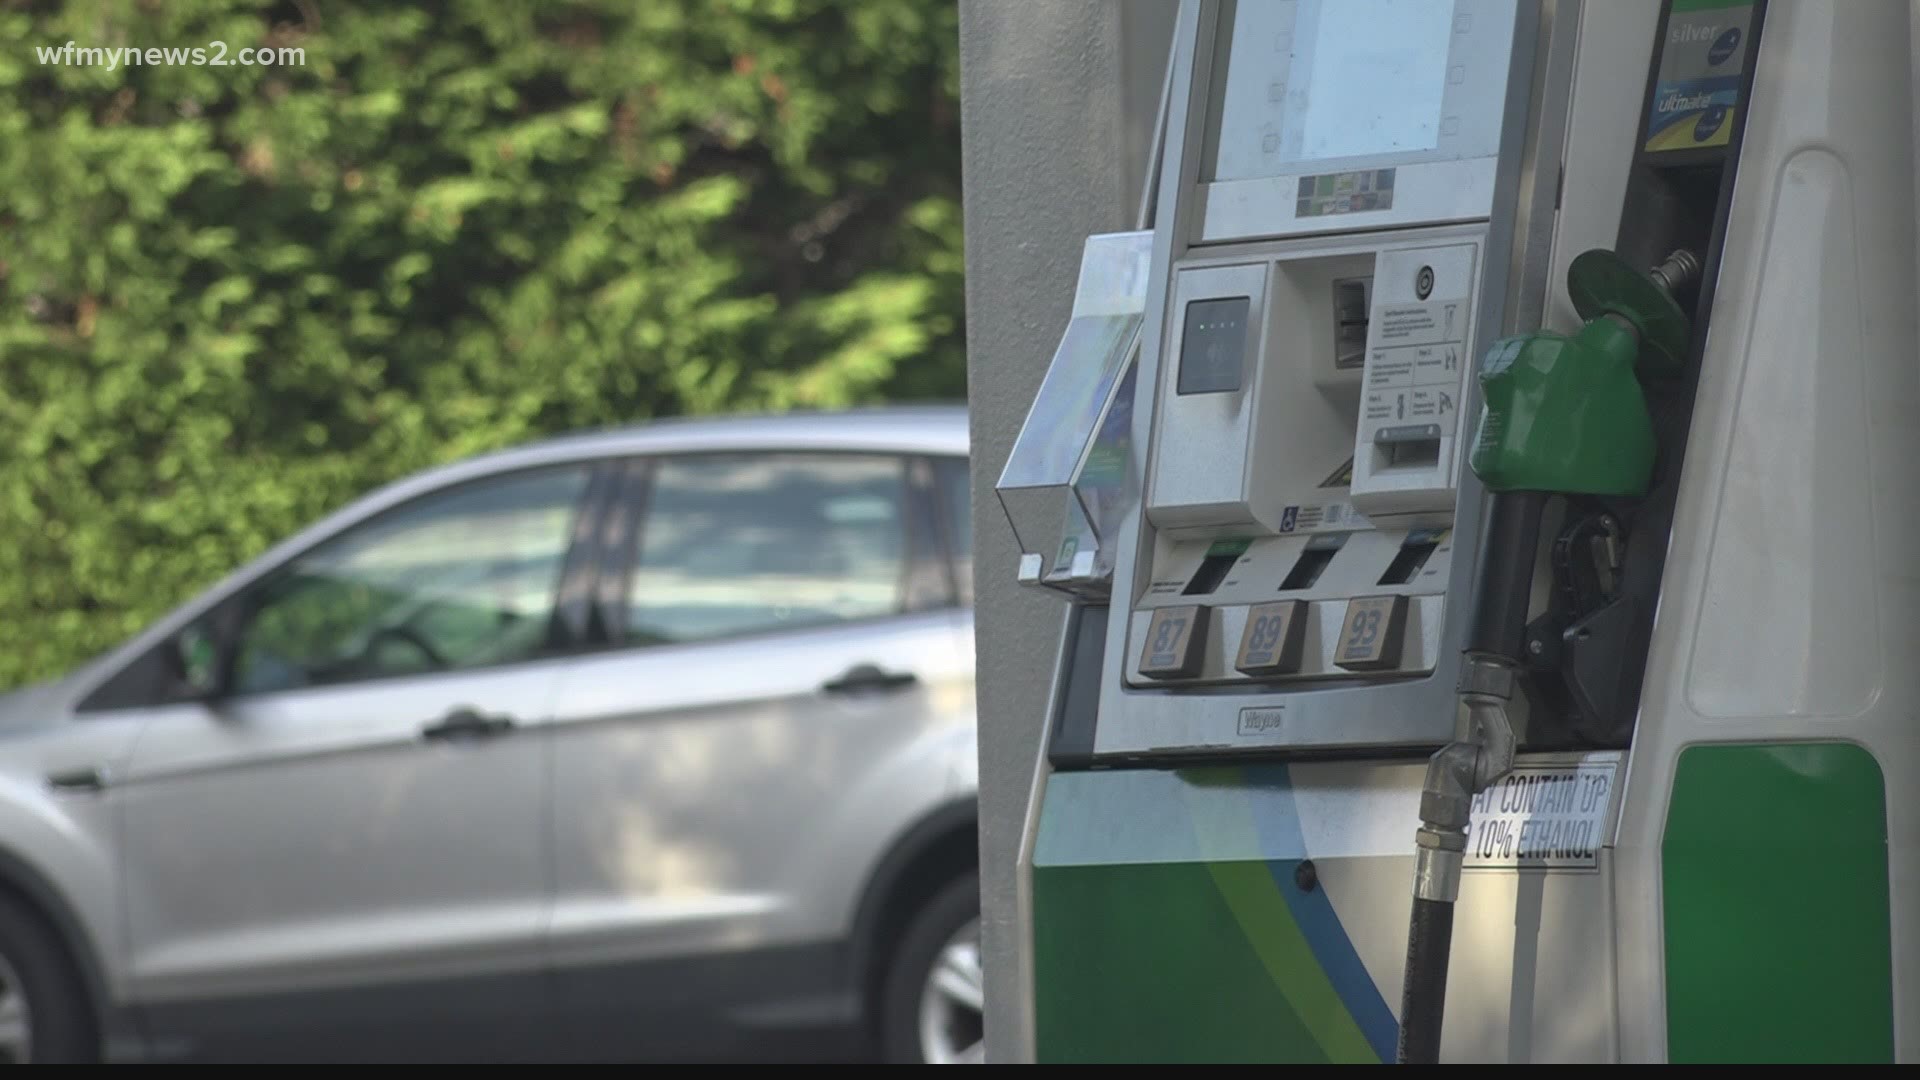 The long lines are gone, but gas is still in short supply in some areas.